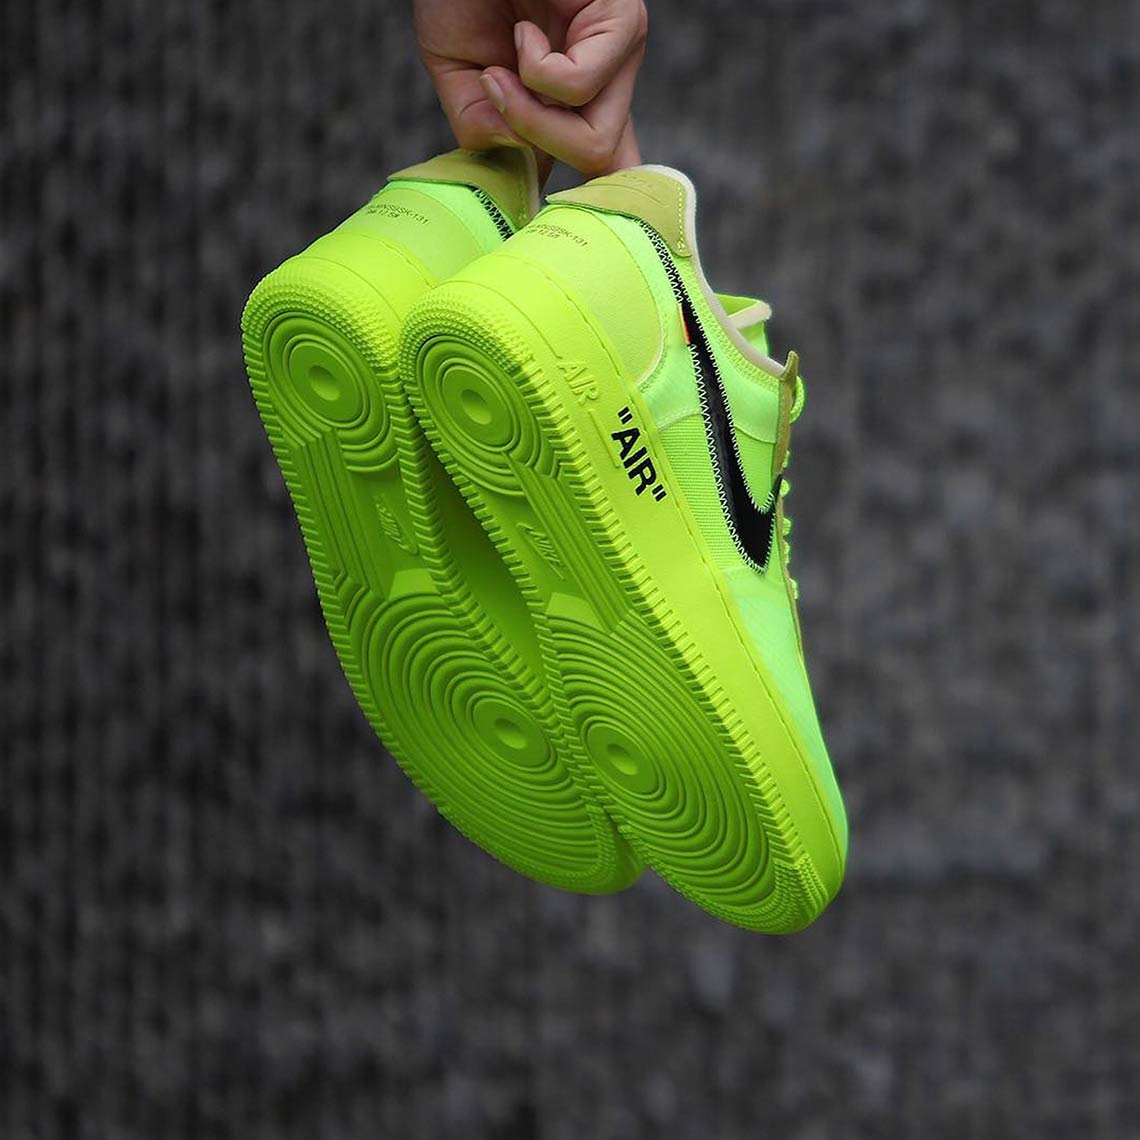 Off White Nike Air Force 1 Low Black + Volt Info | SneakerNews.com